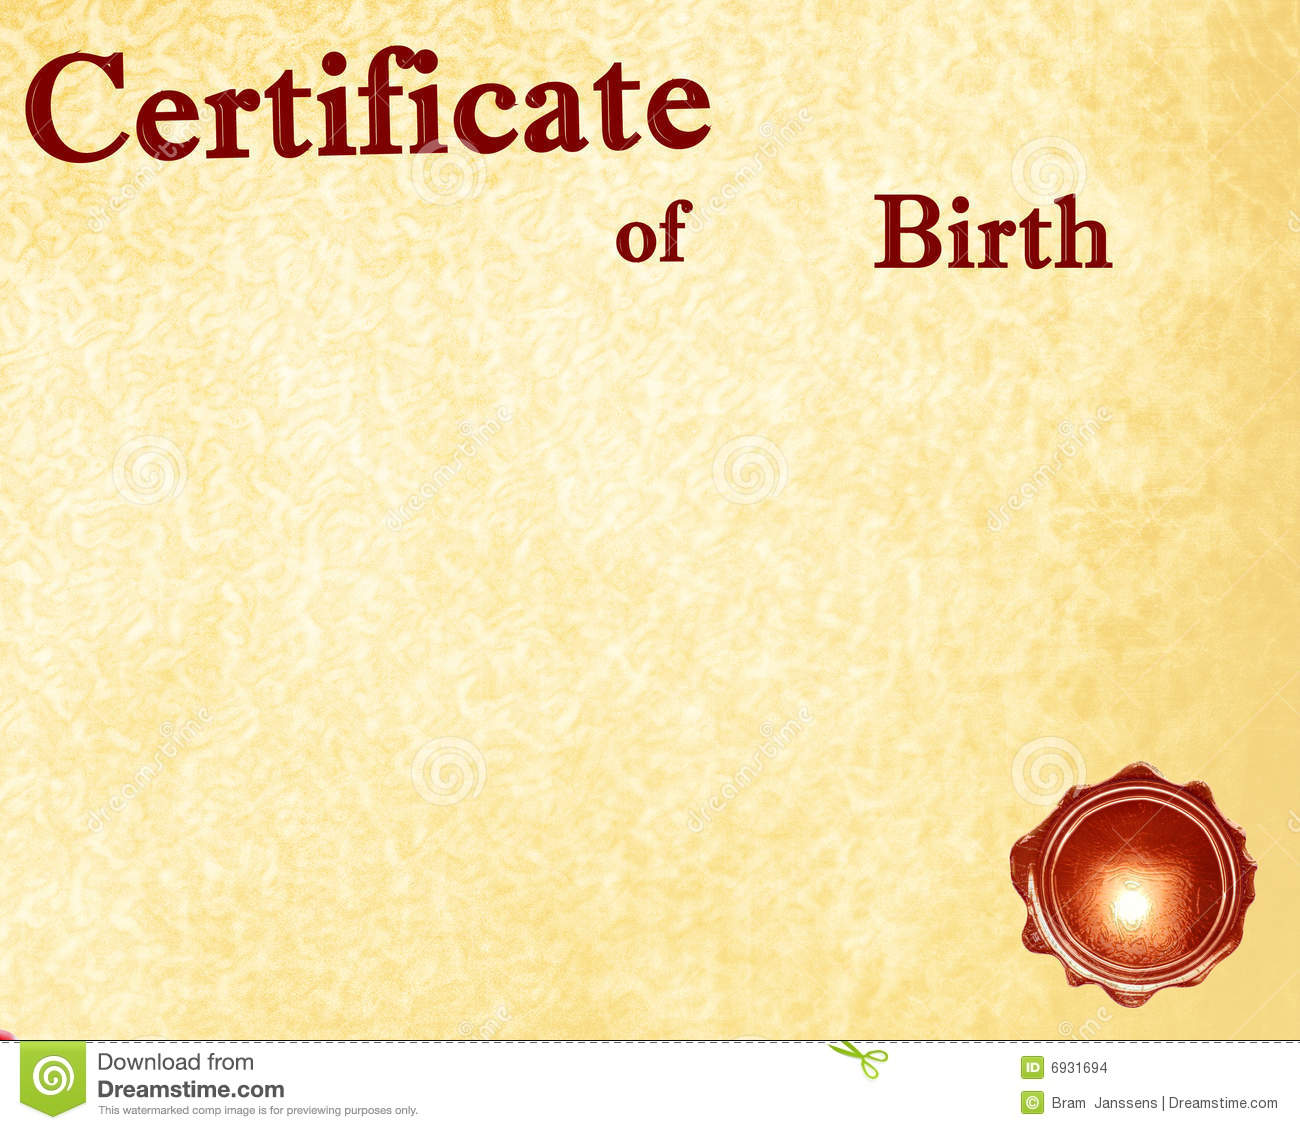 Certificate Of Birth With A Wax Seal On It 